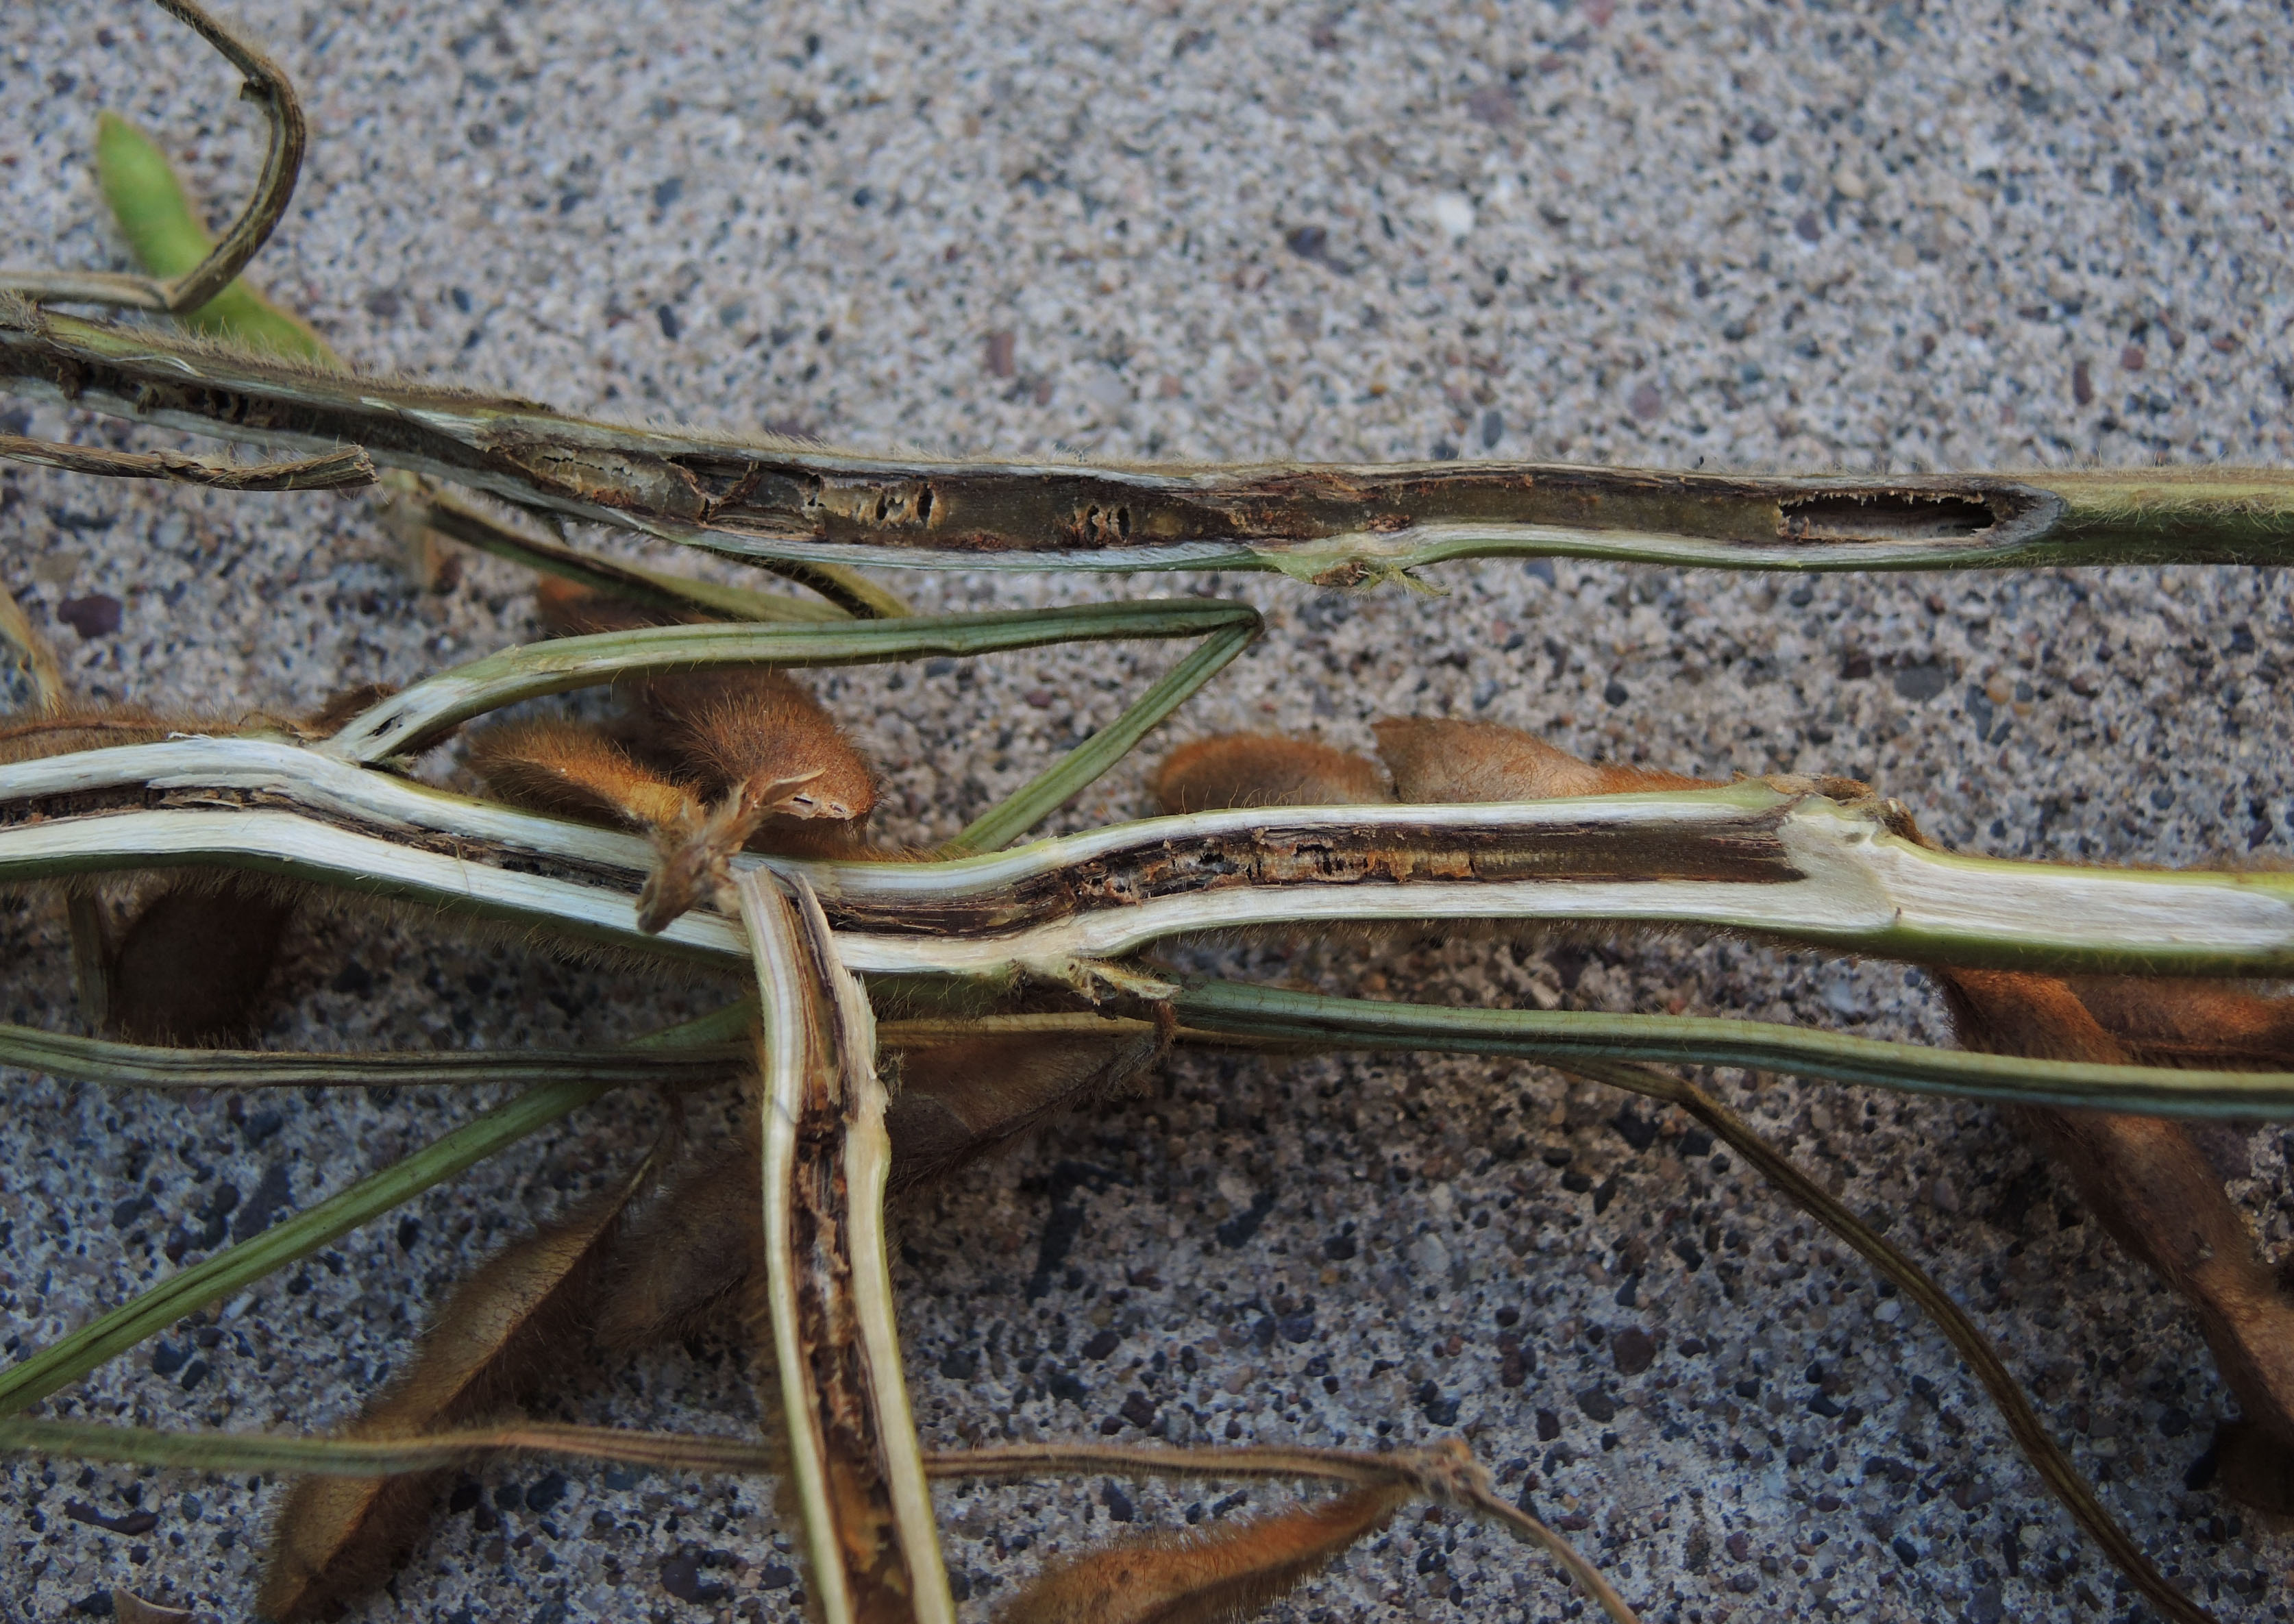 A close-up view of the inside of a soybean plant stem that is brown and dry at its center.